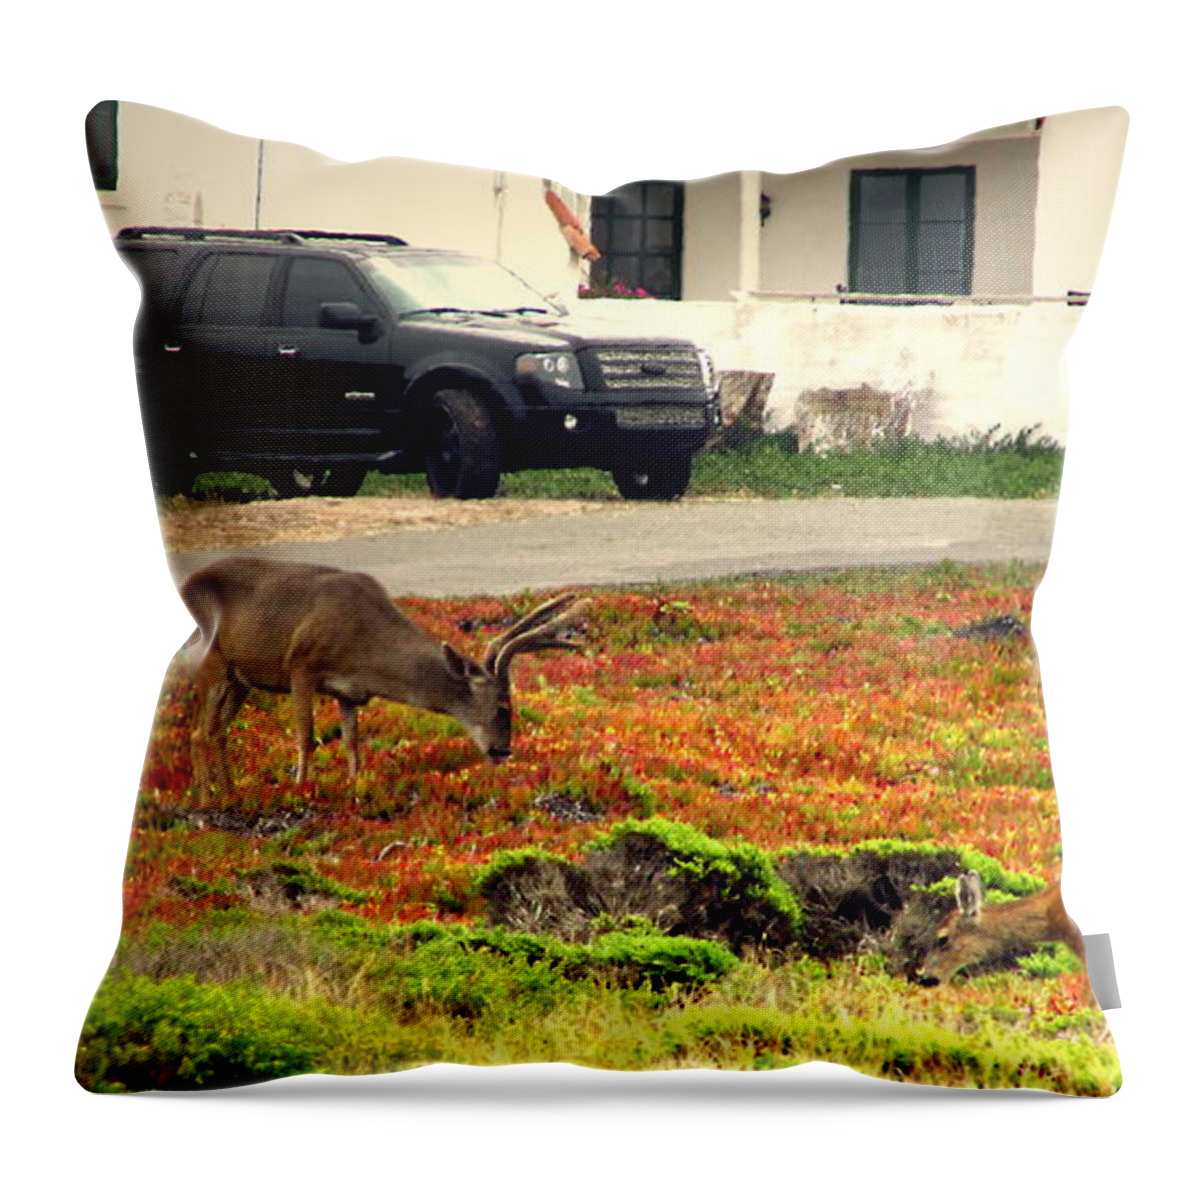 Deer Throw Pillow featuring the photograph Pacific Grove Deer In The Front Yard by Joyce Dickens